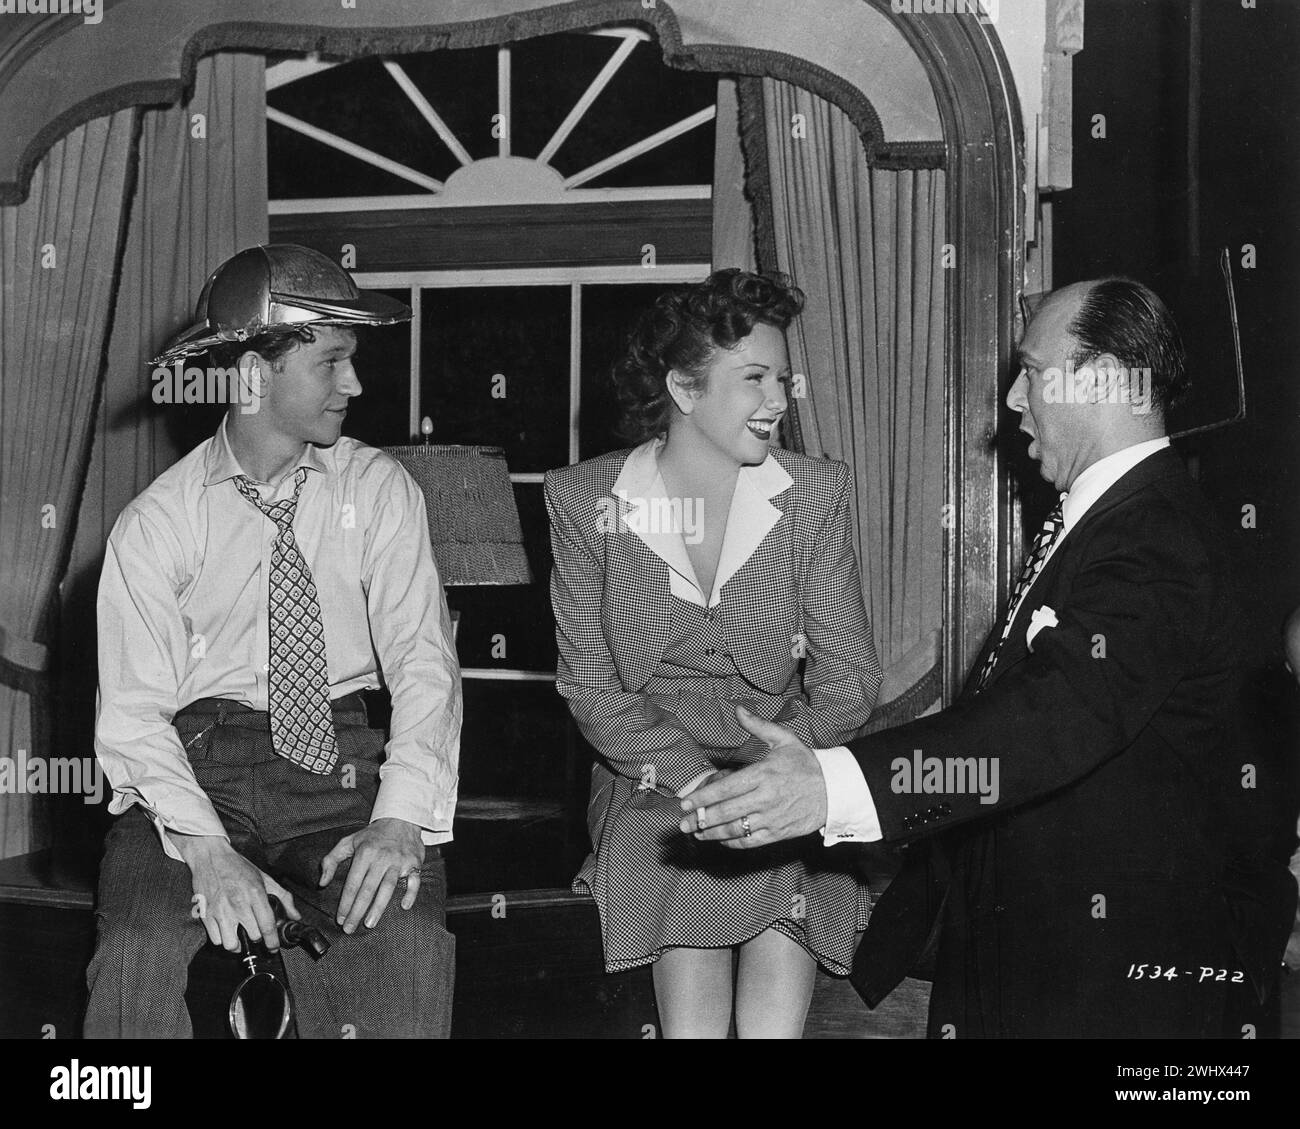 Candian film actress and singer DEANNA DURBIN photographed during the making of SOMETHING IN THE WIND 1947 with co-star DONALD O'CONNOR and music composer JOHNNY GREEN Director IRVING PICHEL Music JOHNNY GREEN Lyrics LEO ROBIN Universal Pictures Stock Photo